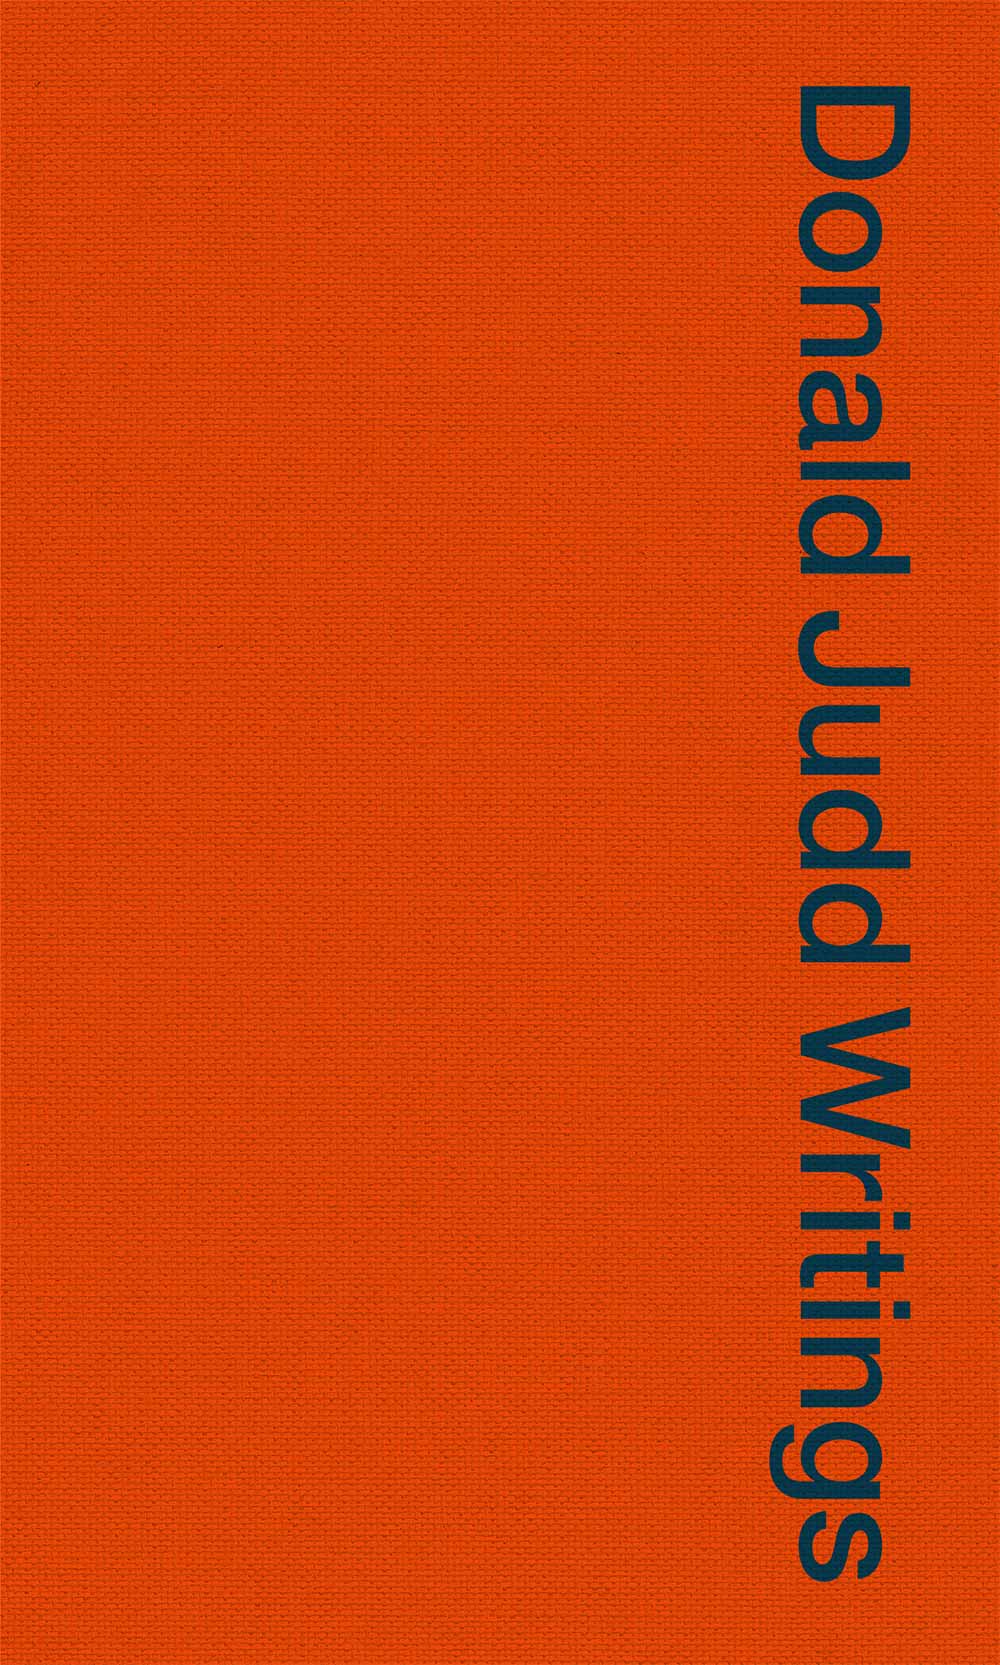 Cover of a book titled Donald Judd Writings, published by David Zwirner Books in 2016.